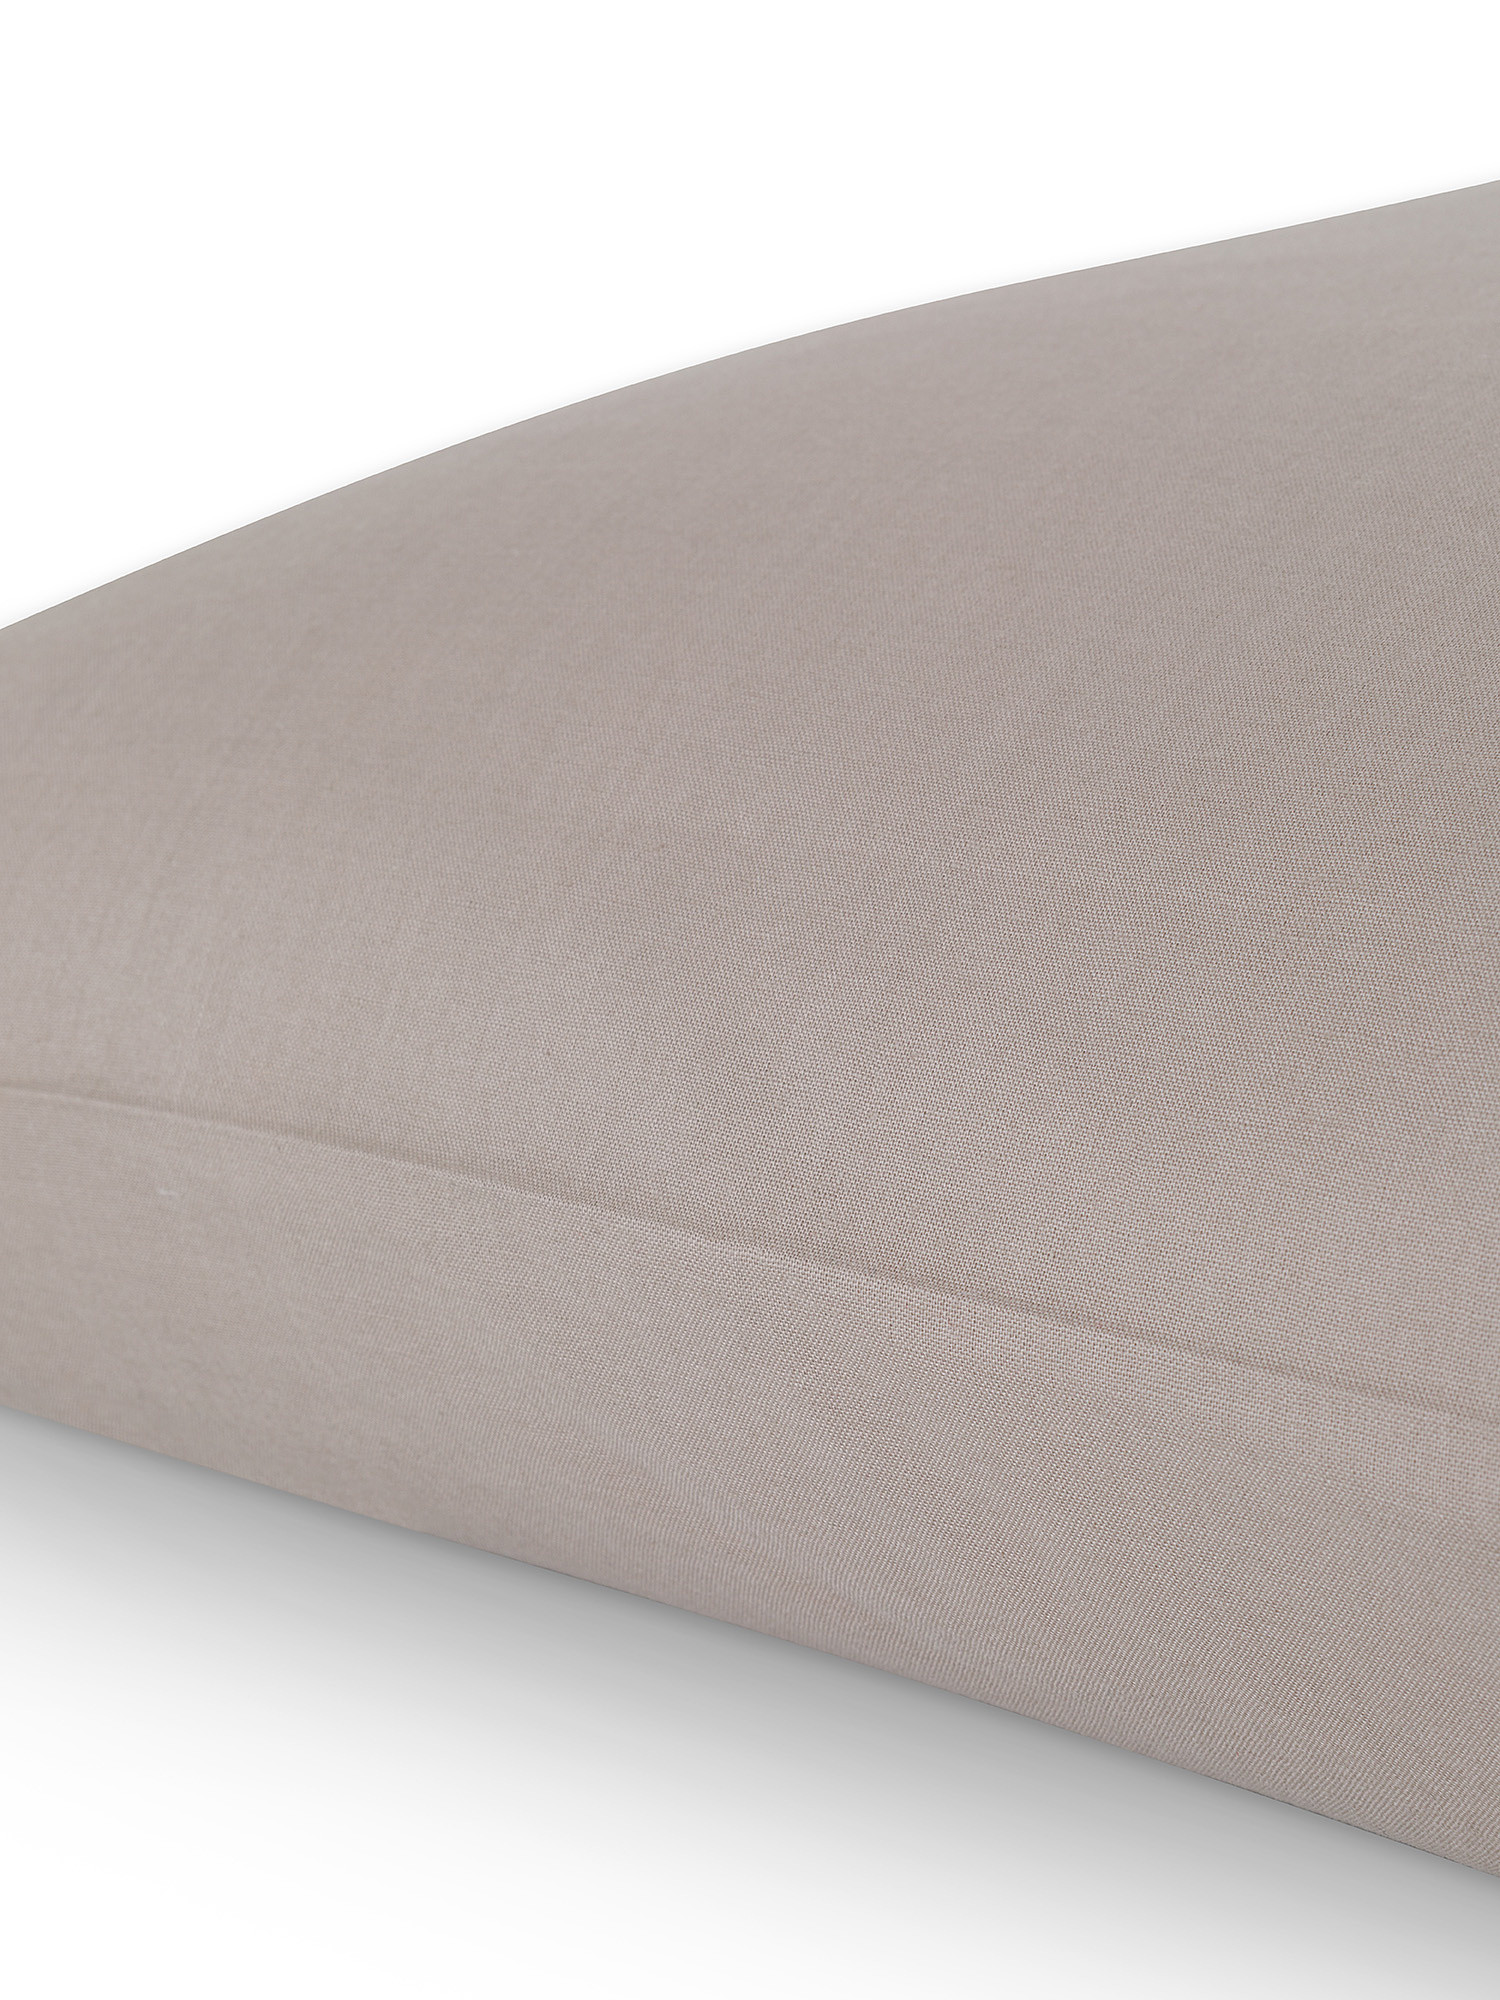 Solid color 100% cotton pillowcase, Beige, large image number 1